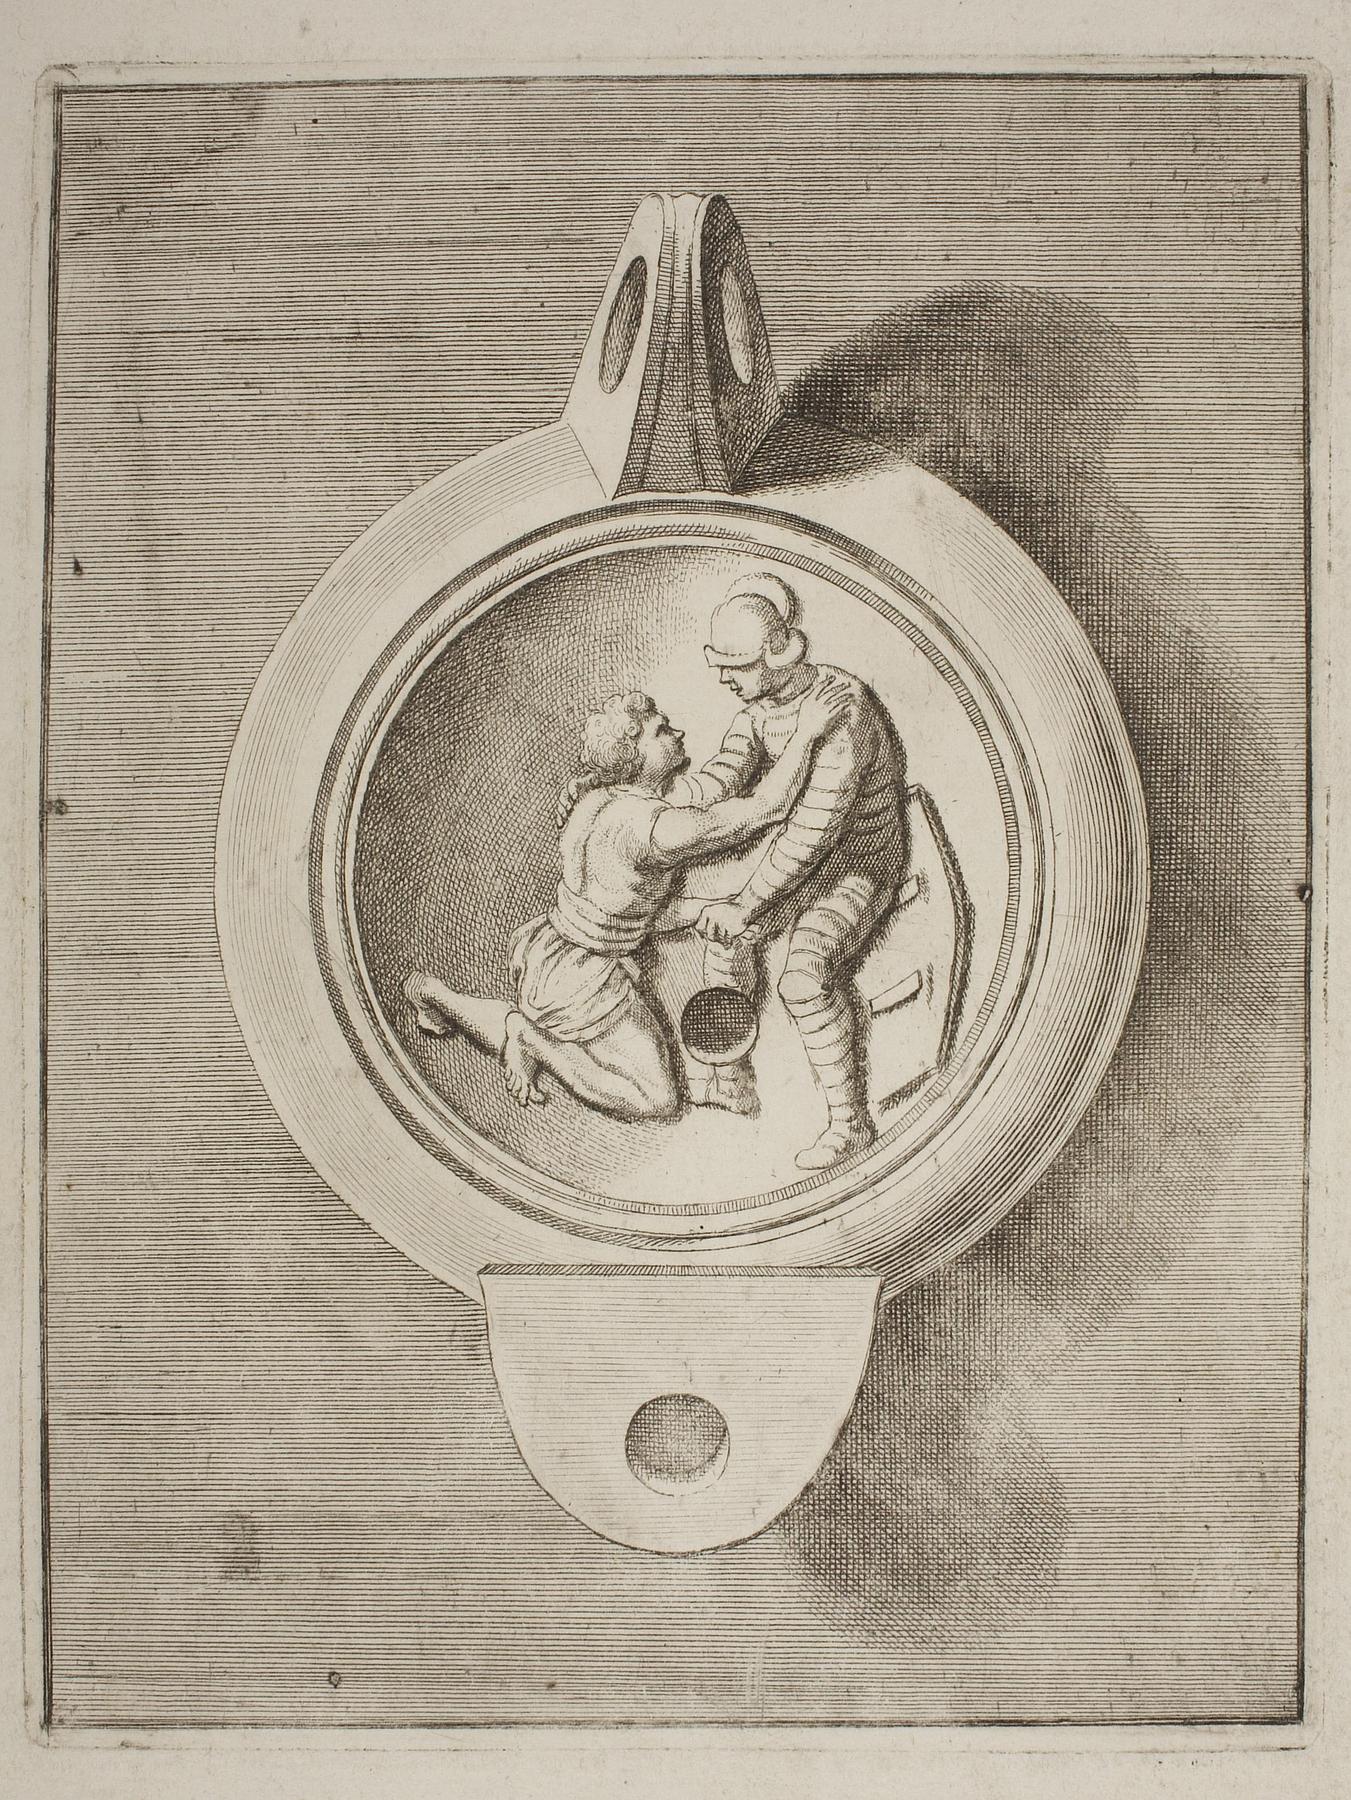 Lamp decorated with two gladiators fighting, E1541